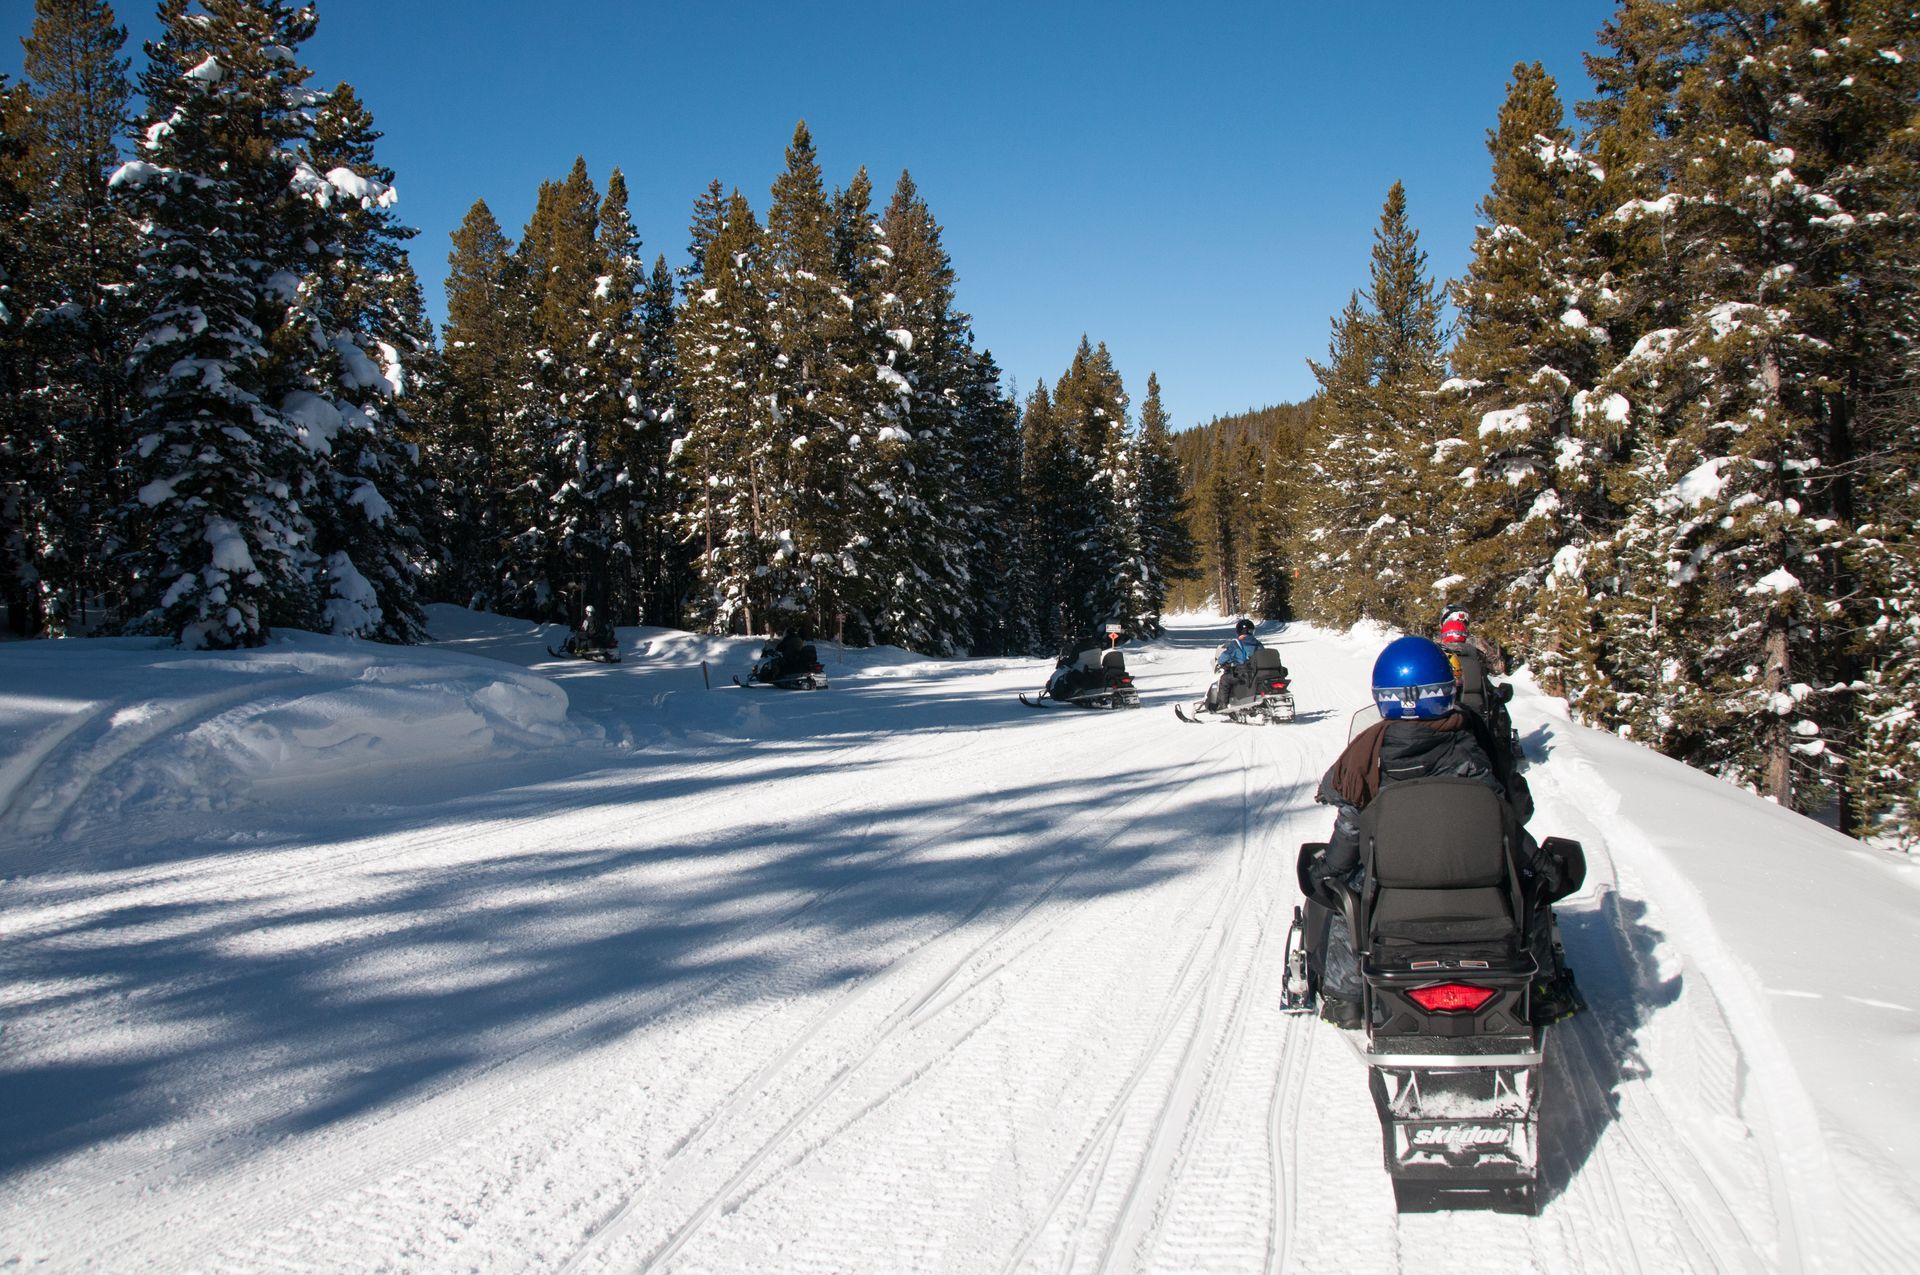 a group of people are riding snowmobiles down a snowy road